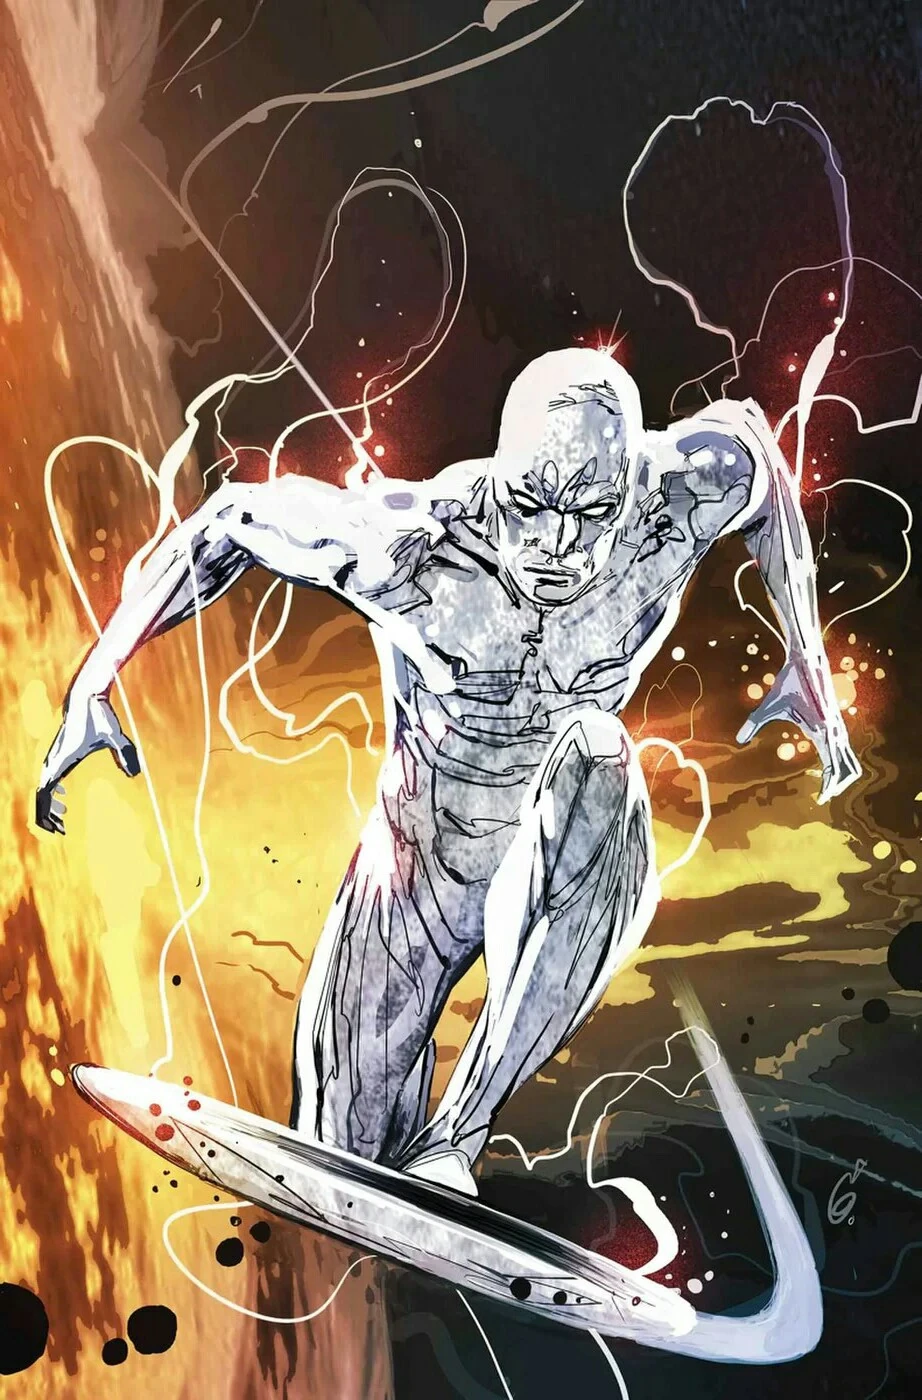 The power cosmic flows through the Silver Surfer on Ron Garney and Richard Isanove's cover to Silver Surfer: The Best Defense Vol. 1 #1 (2018), Marvel Comics